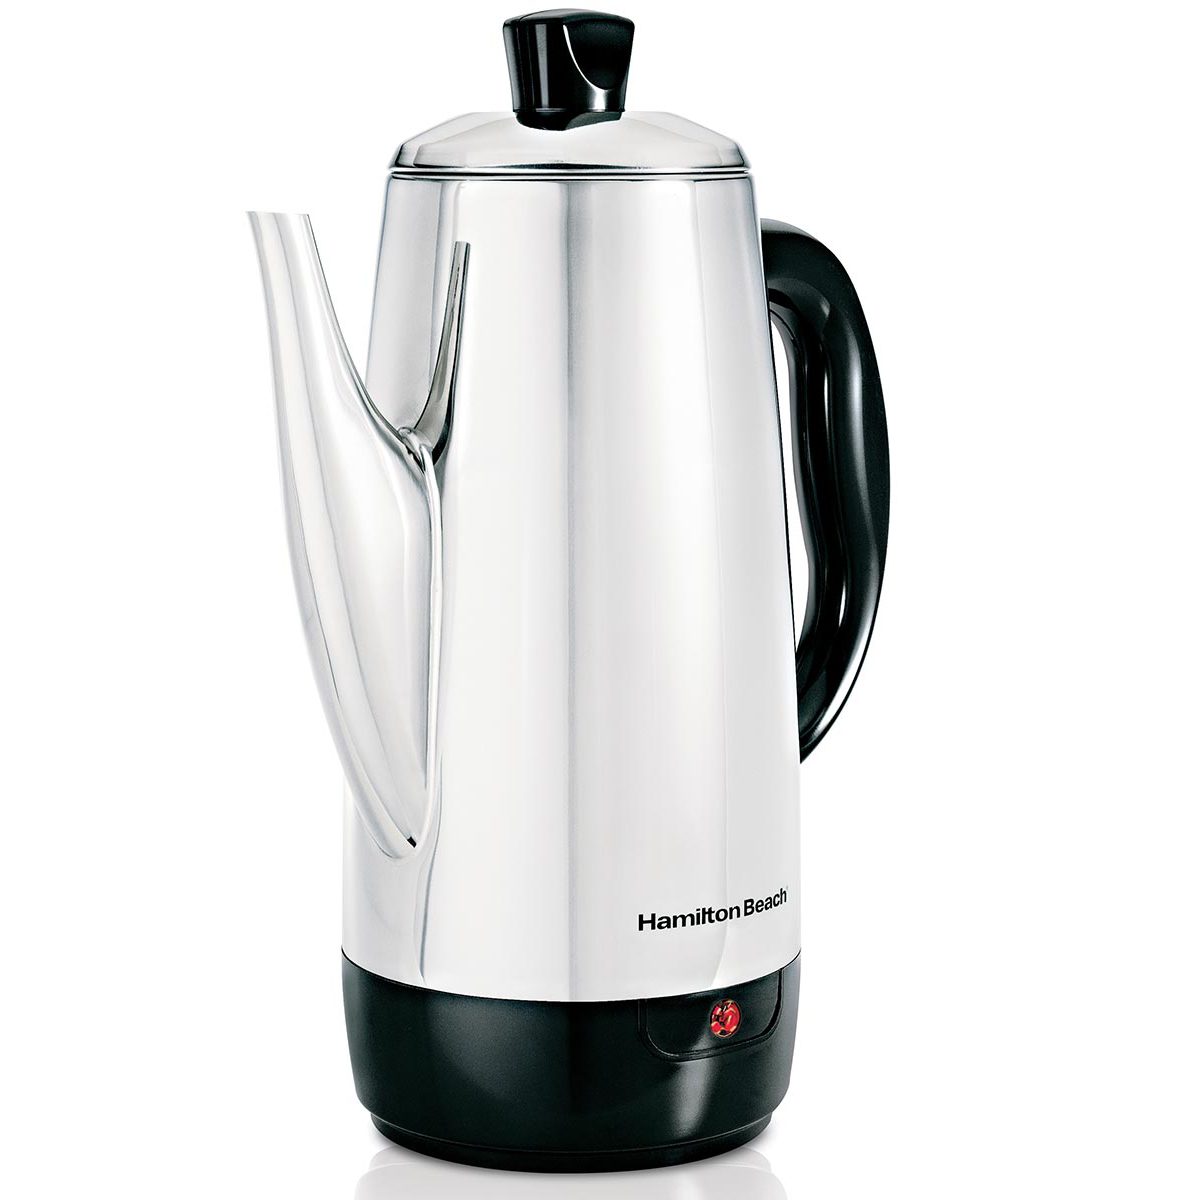 12 Cup Percolator with Cool-Touch Handle Stainless Steel (40616)